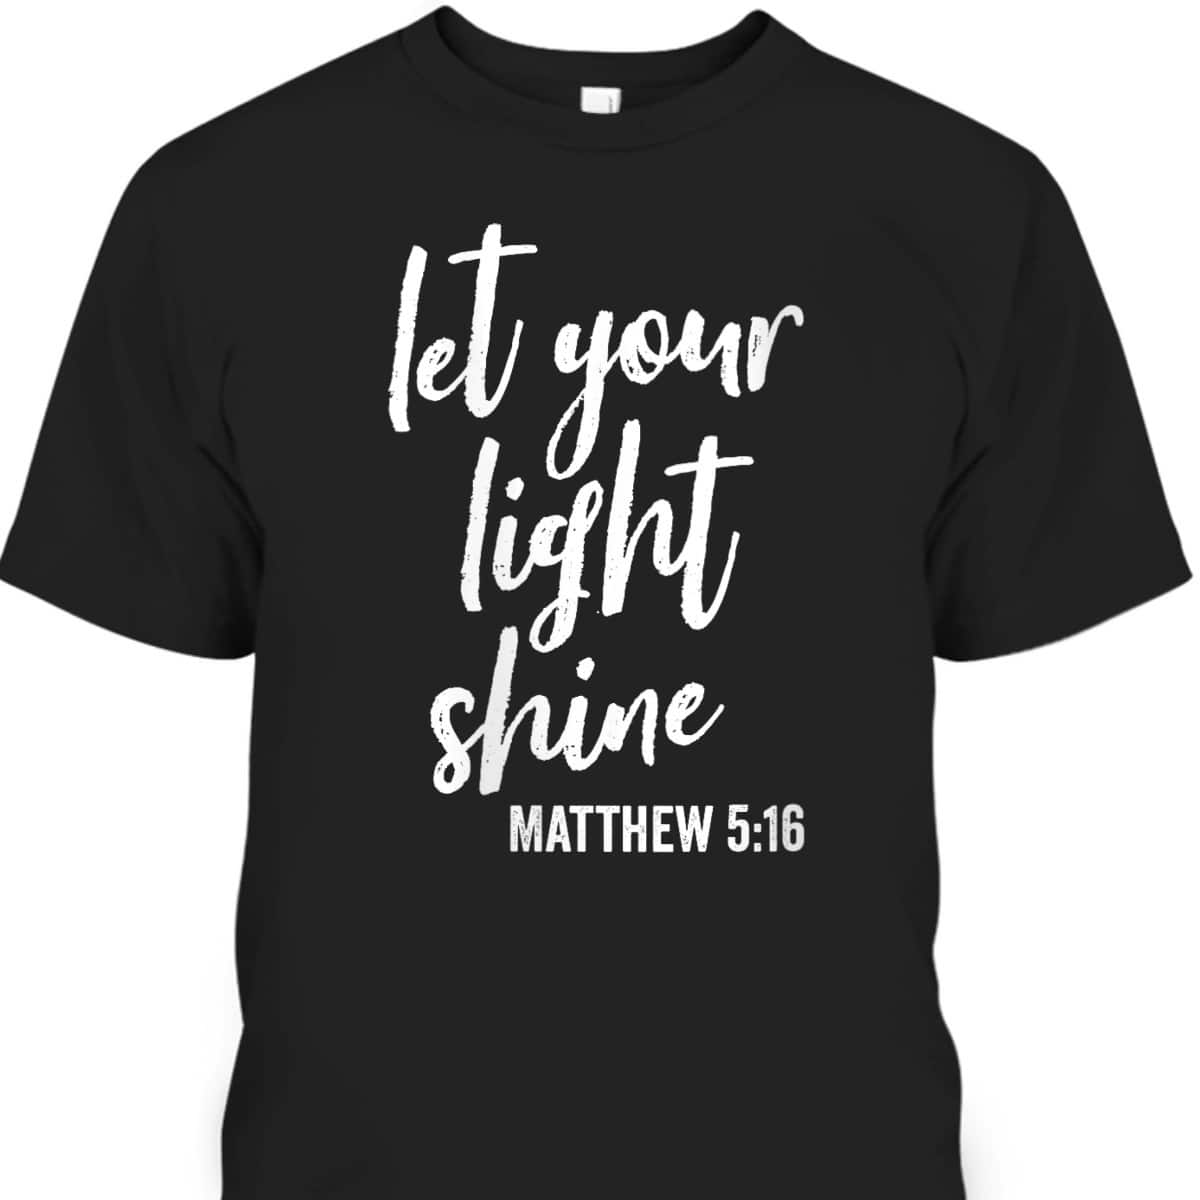 Let Your Light Shine Faith In God And Christ Matthew 5:16 T-Shirt